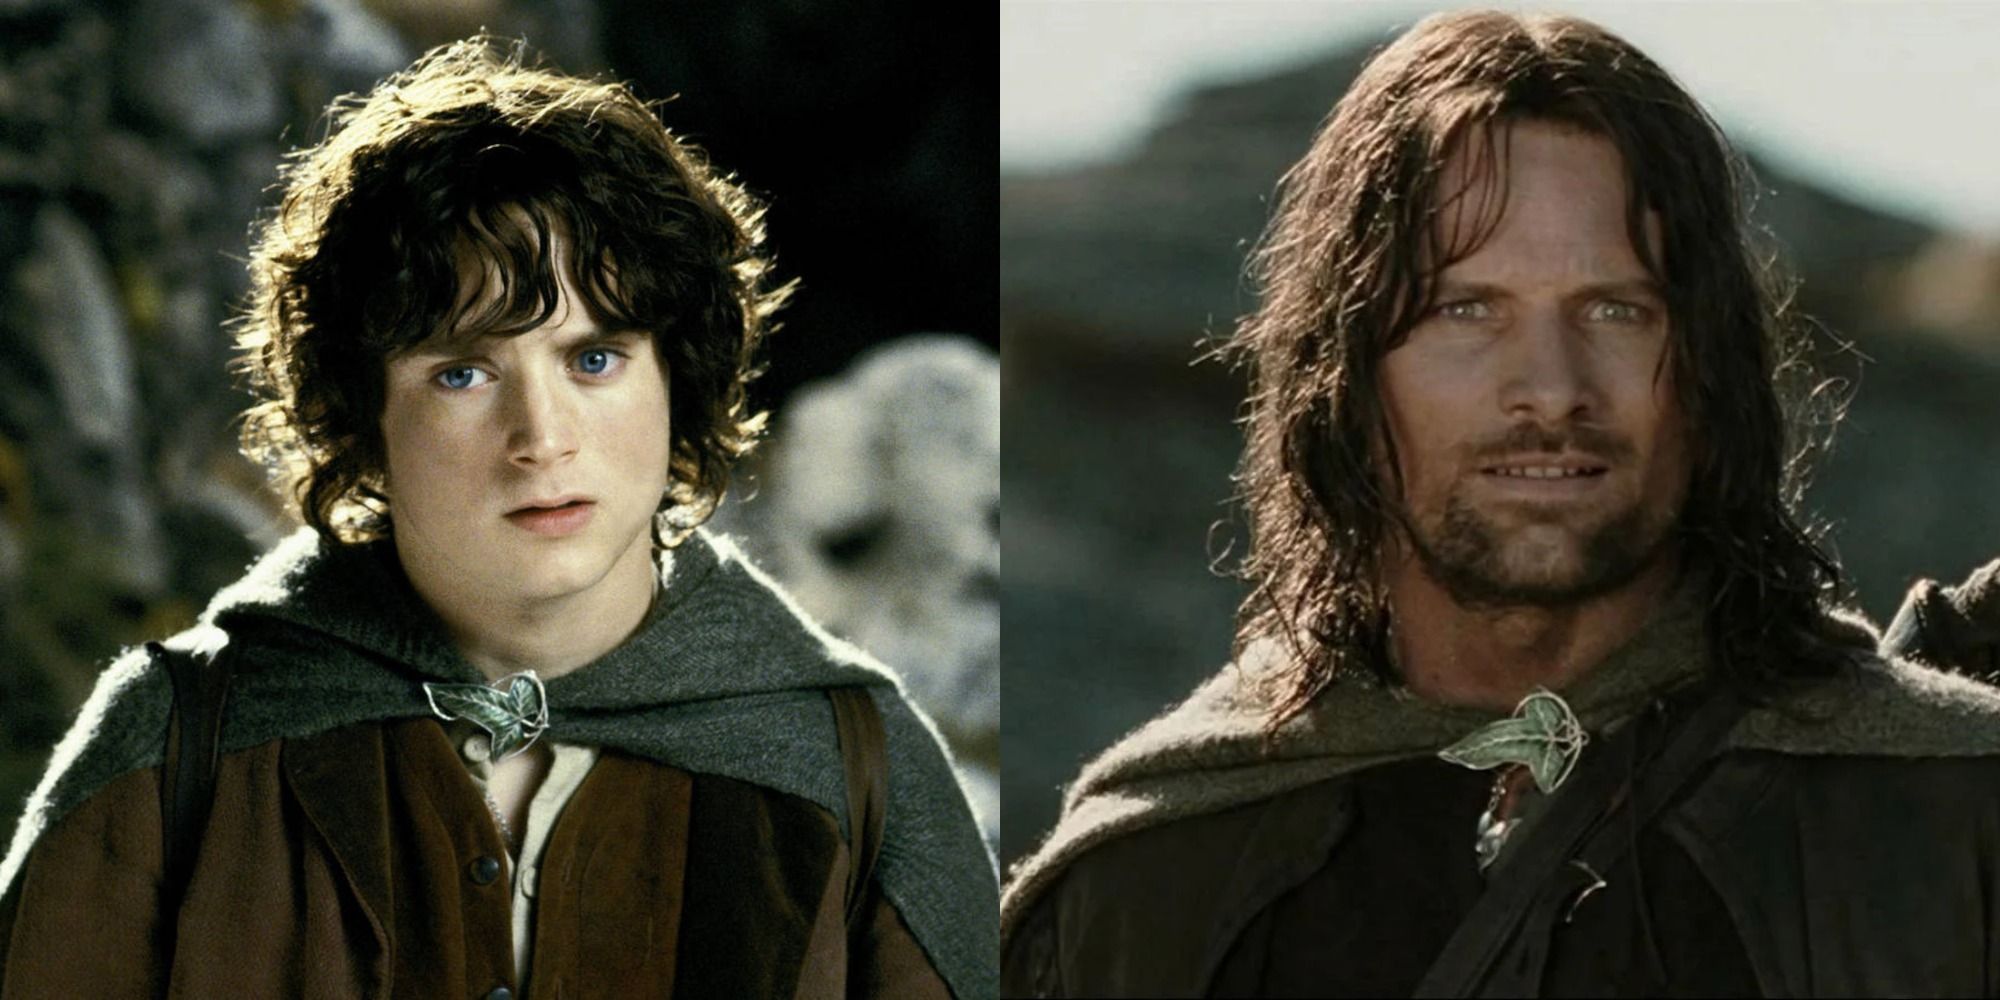 Split image showing Frodo and Aragorn in The Lord of the Rings.